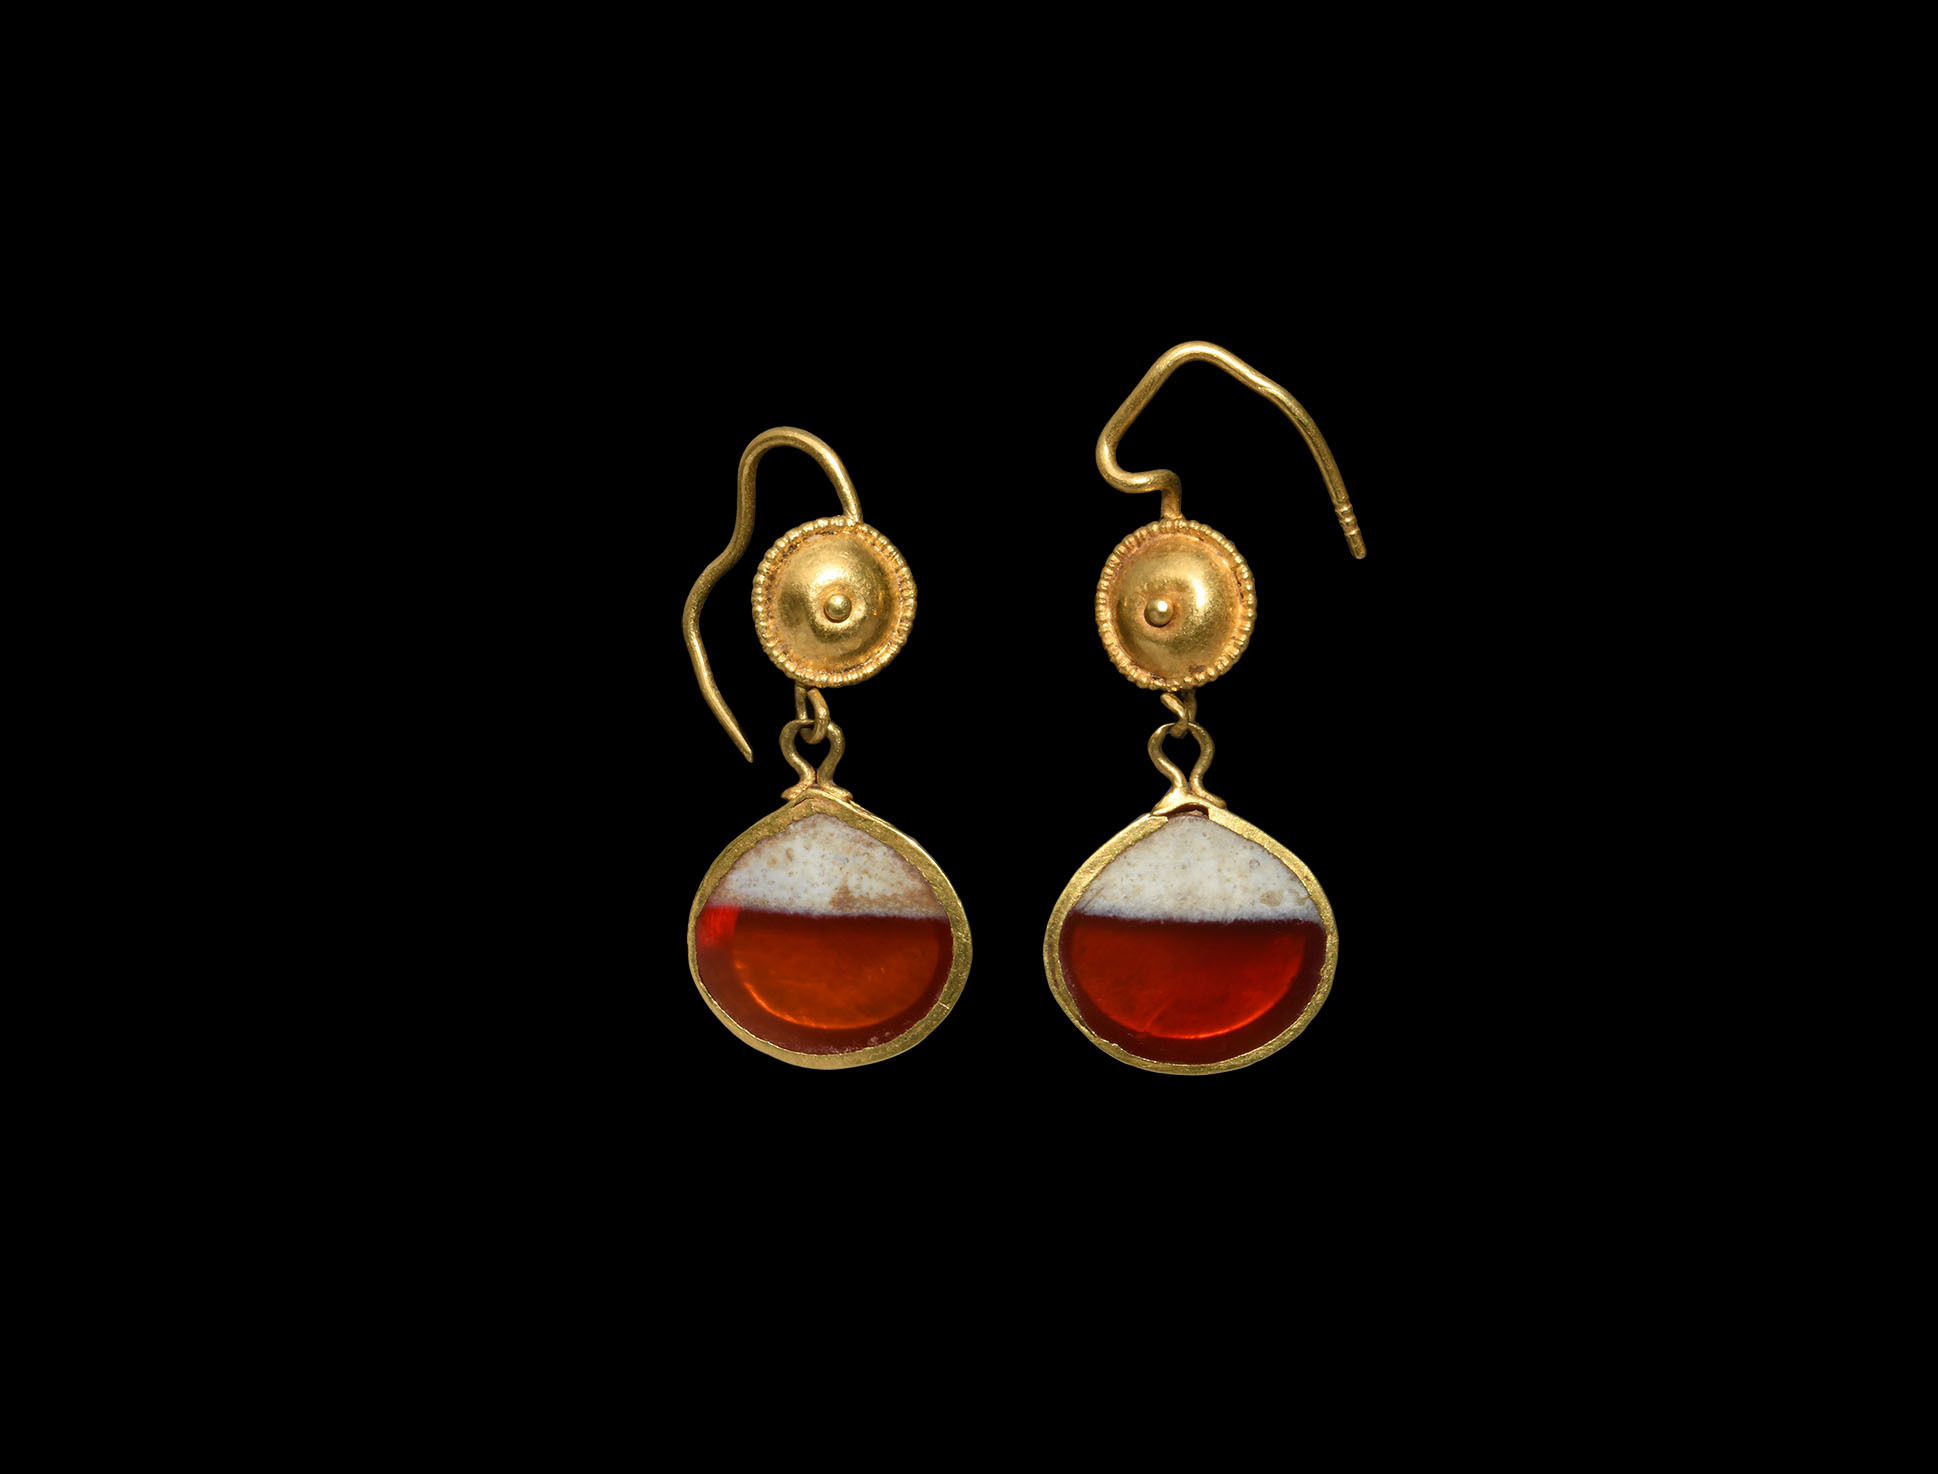 Roman Gold Earring Pair with Glass Inlay